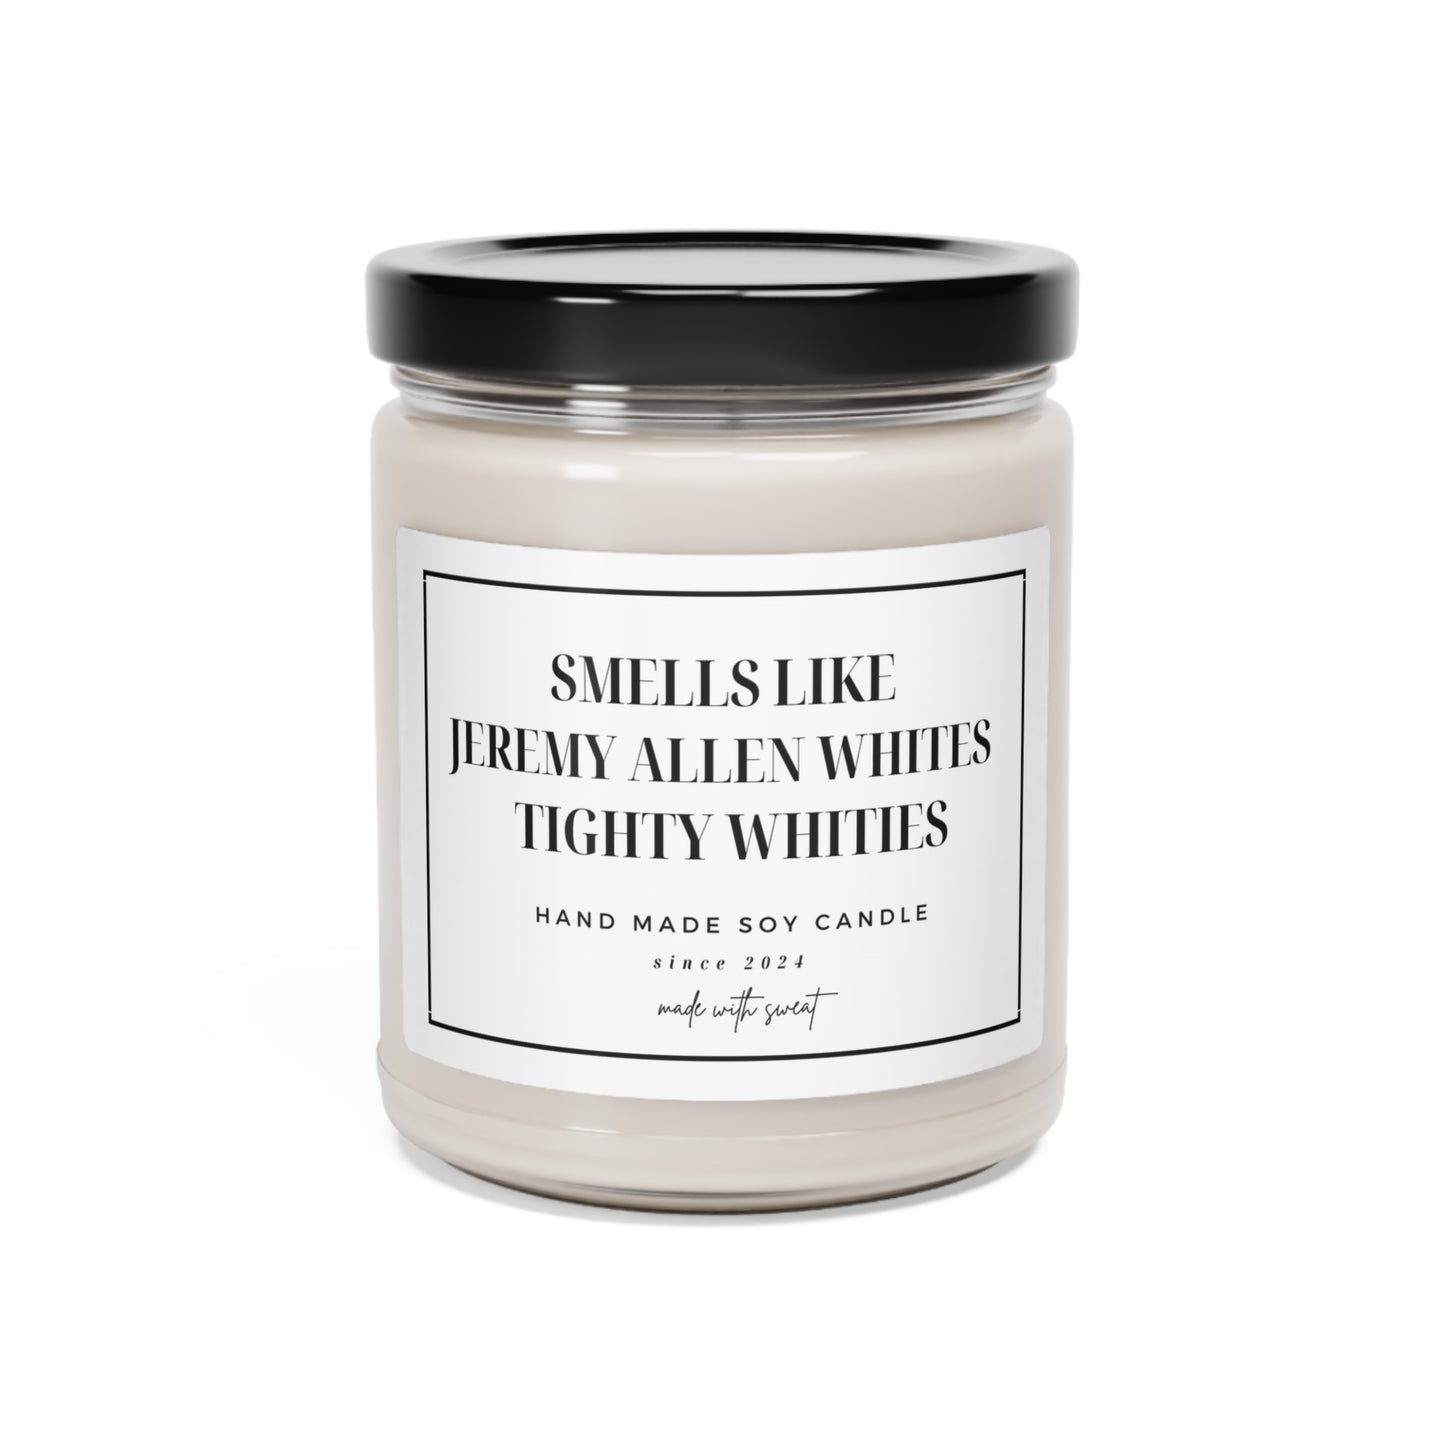 Smells Like Jeremy Allen Whites Tighty Whities Candle, The Bear Gift, Yes Chef Gift, Funny Gift, Gift For Her, Gift For Mom, Gift for Sister